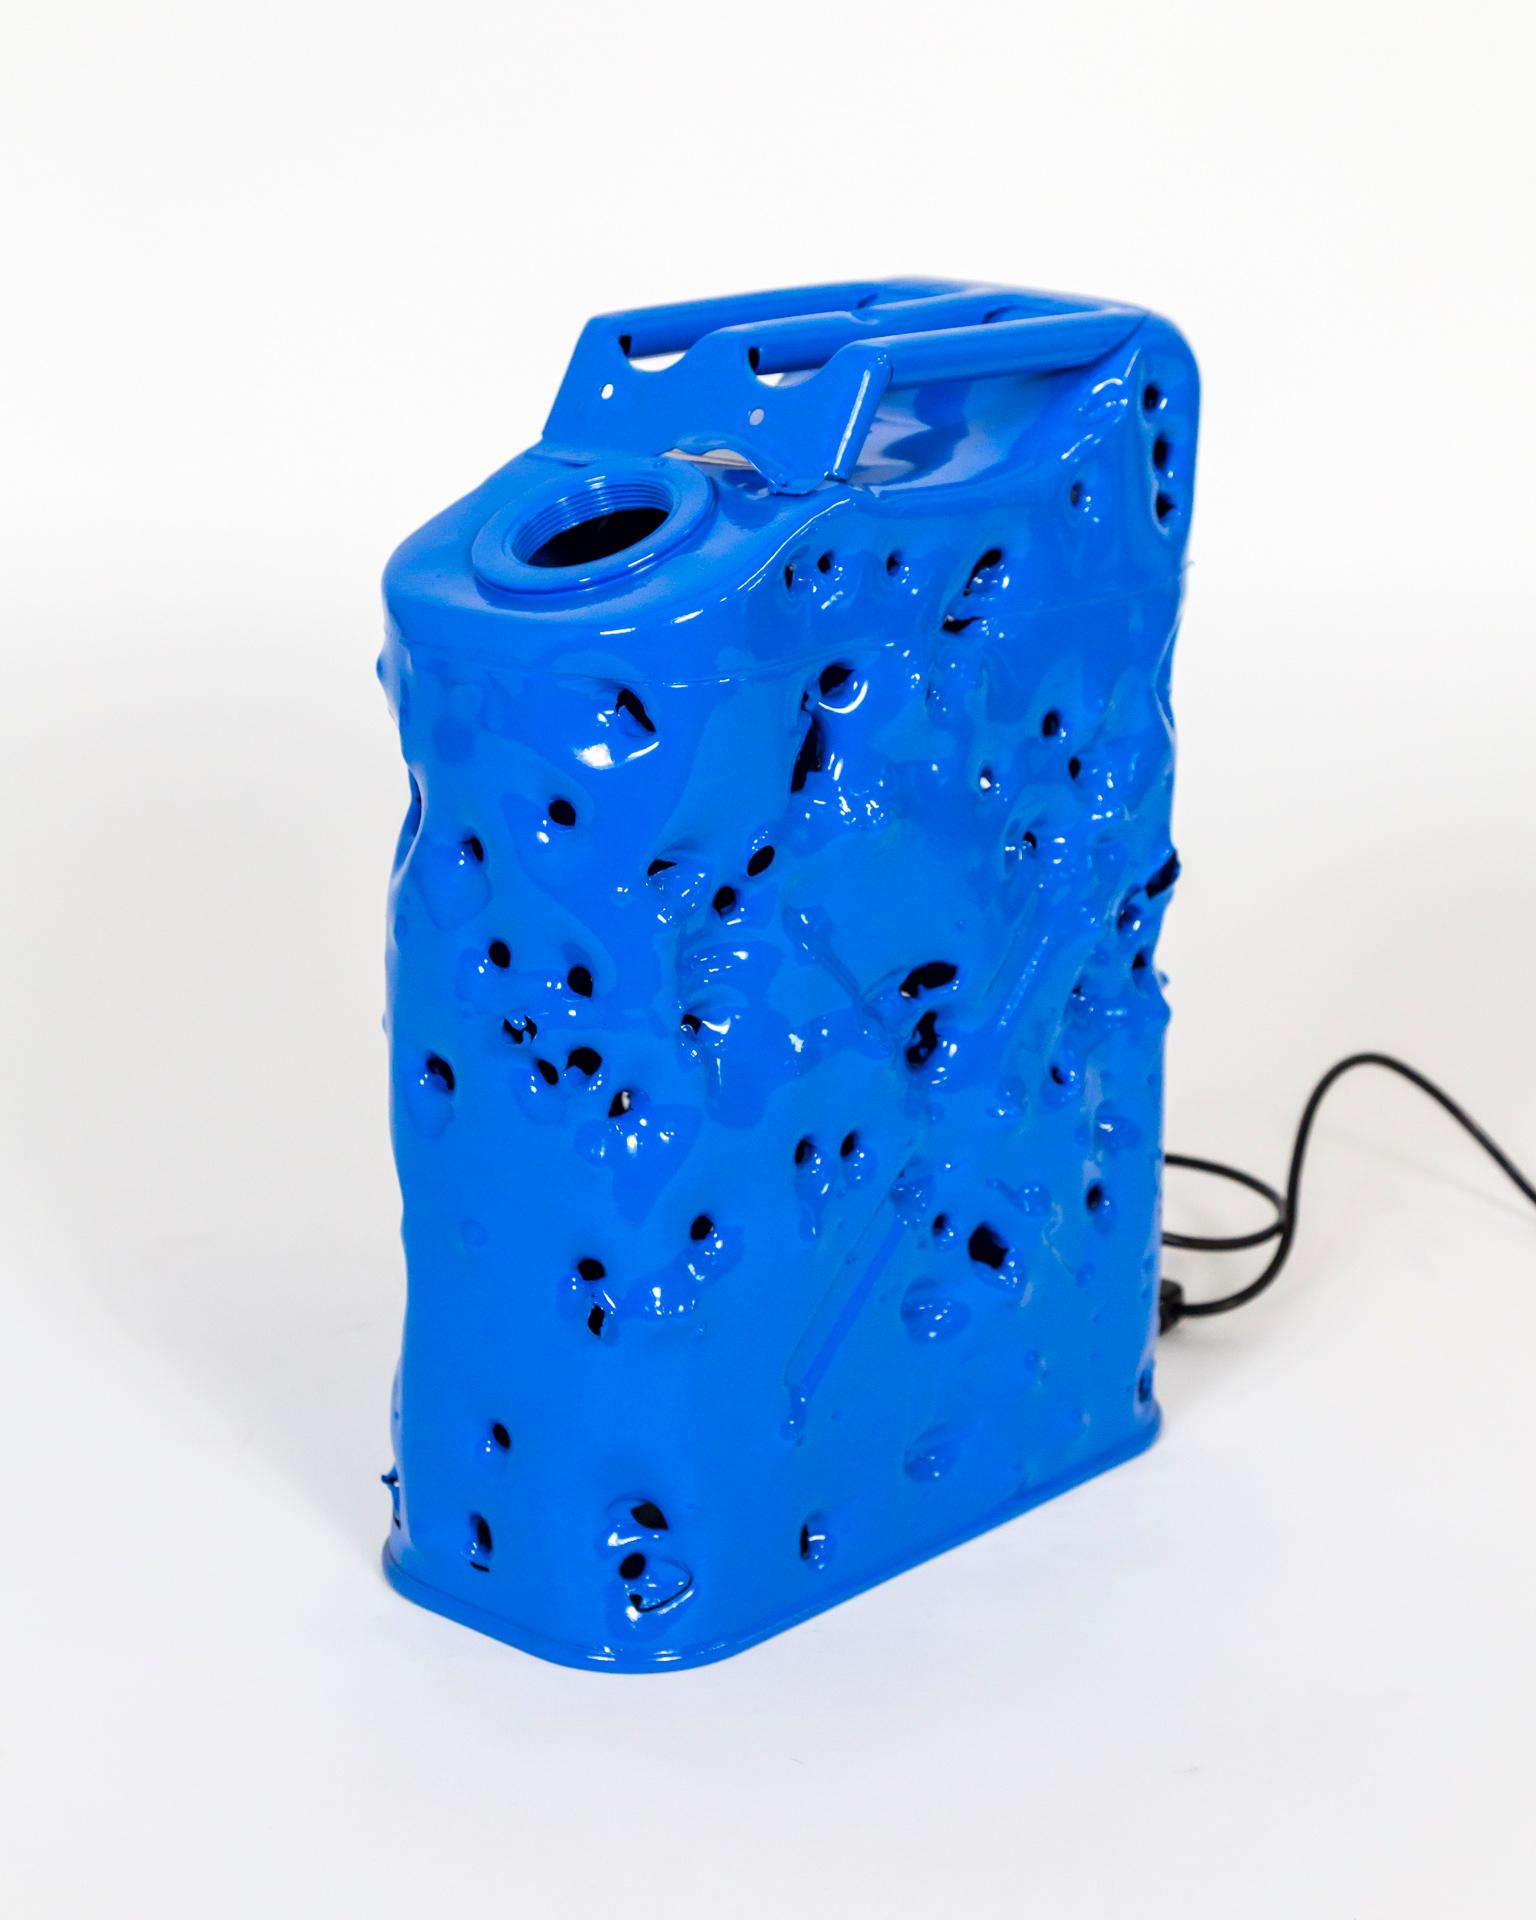 Powder-Coated Blue Bullet Hole Can Lamp by Charles Linder